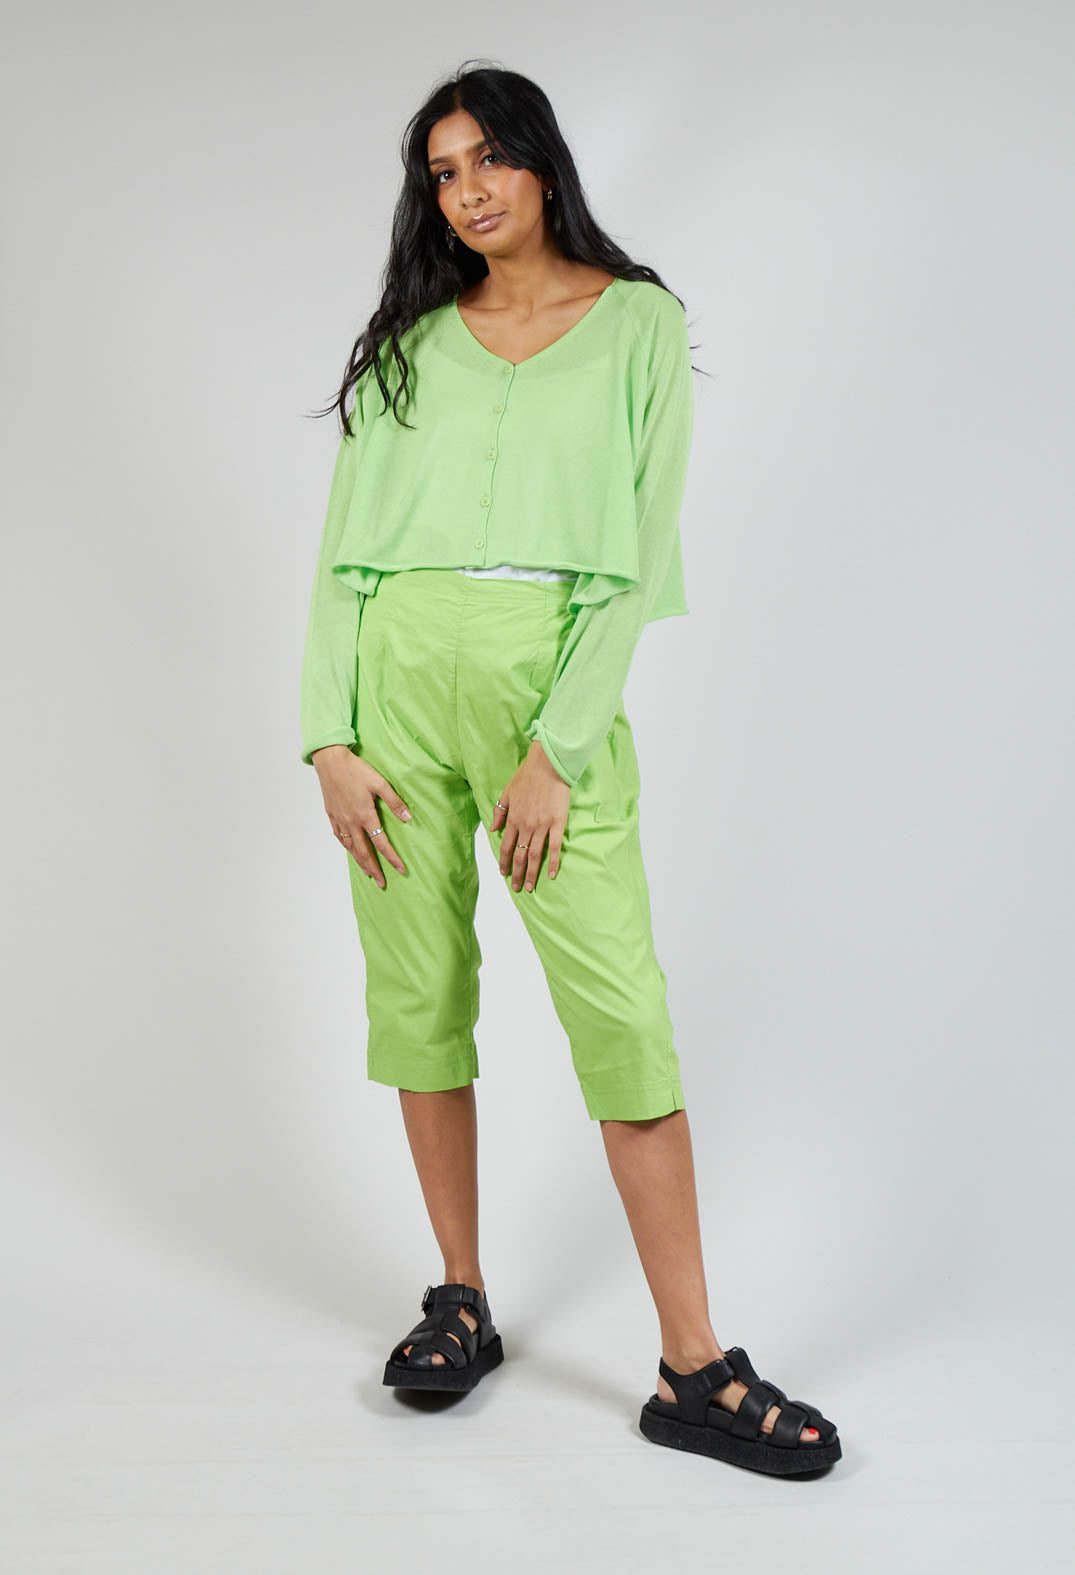 Cropped Slim Leg Trousers in Lime